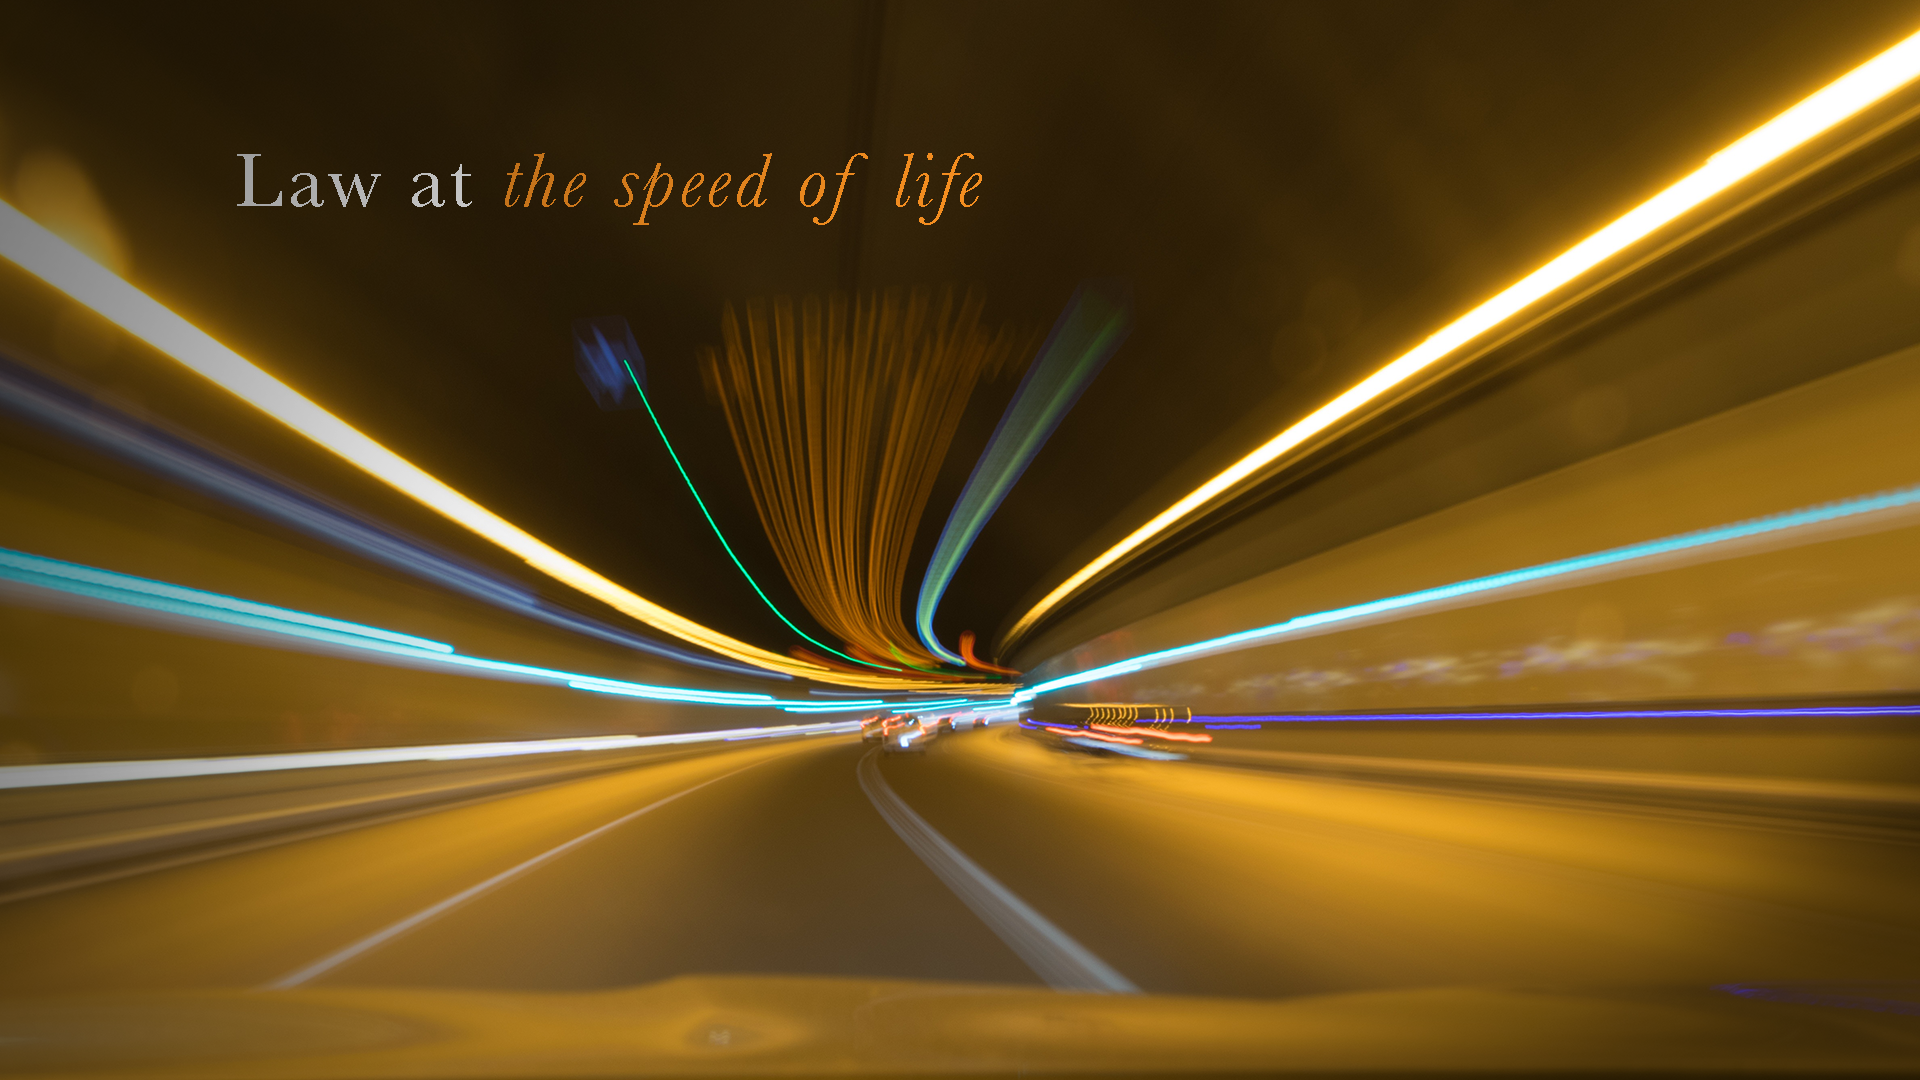 Law at the speed of life